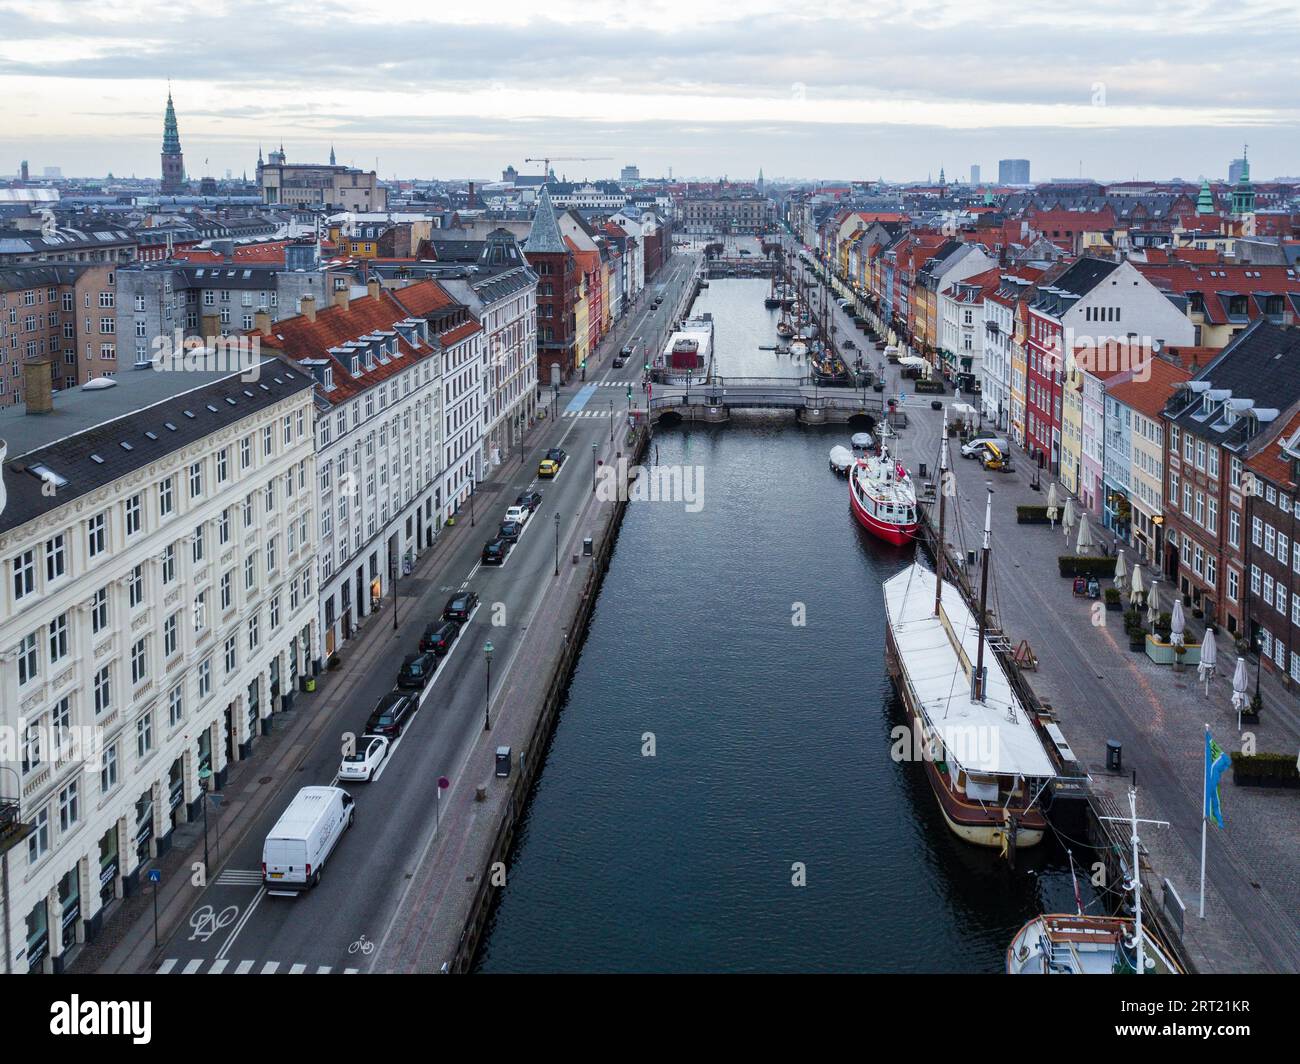 Copenhagen, Denmark, April 07, 2020: Aerial drone view of the famous Nyhavn district in the historic city centre Stock Photo